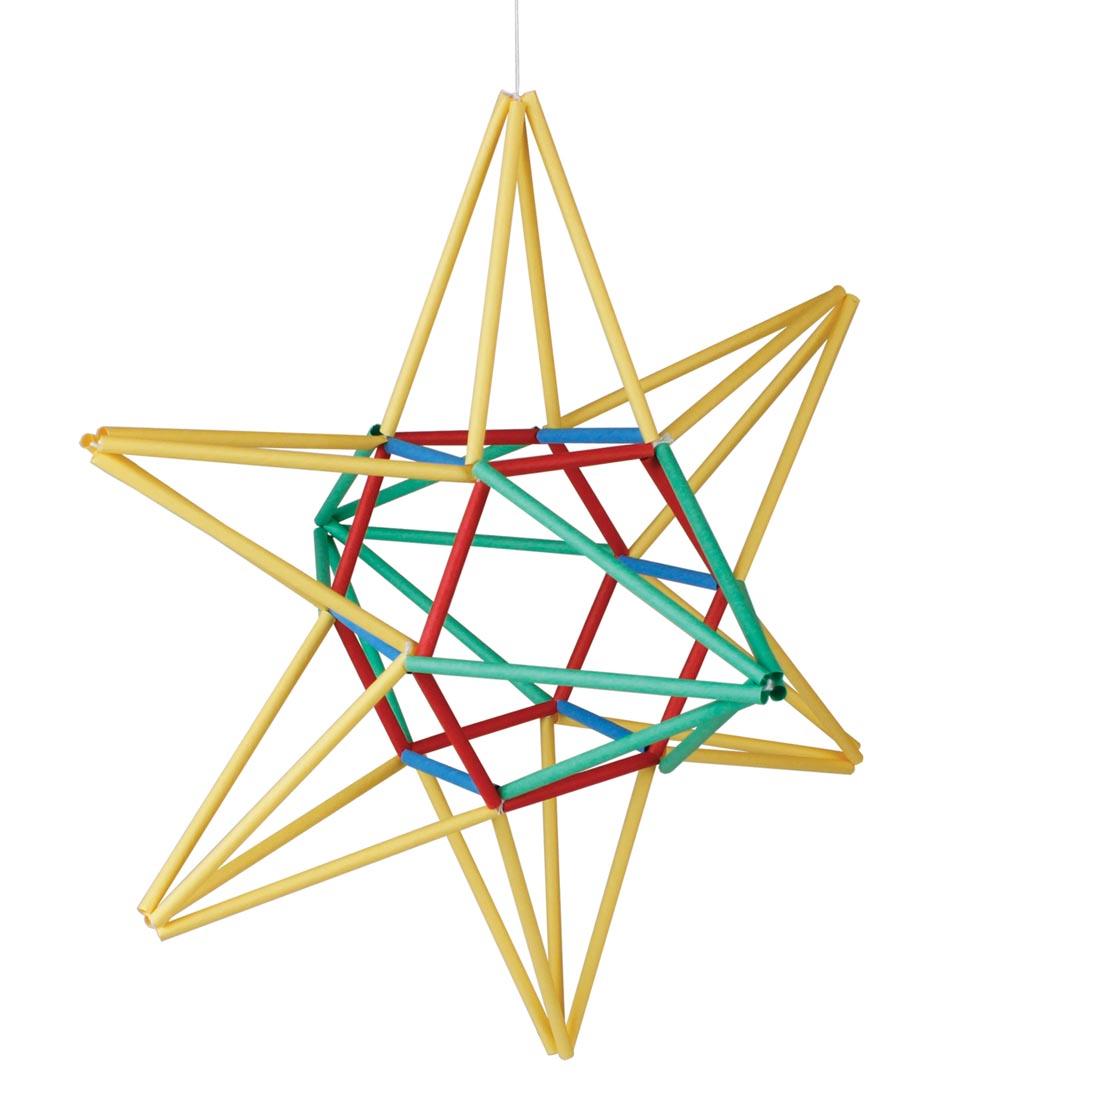 An example of a completed star made from the Himmeli Star Mobile Project Kit With Colored Artstraws